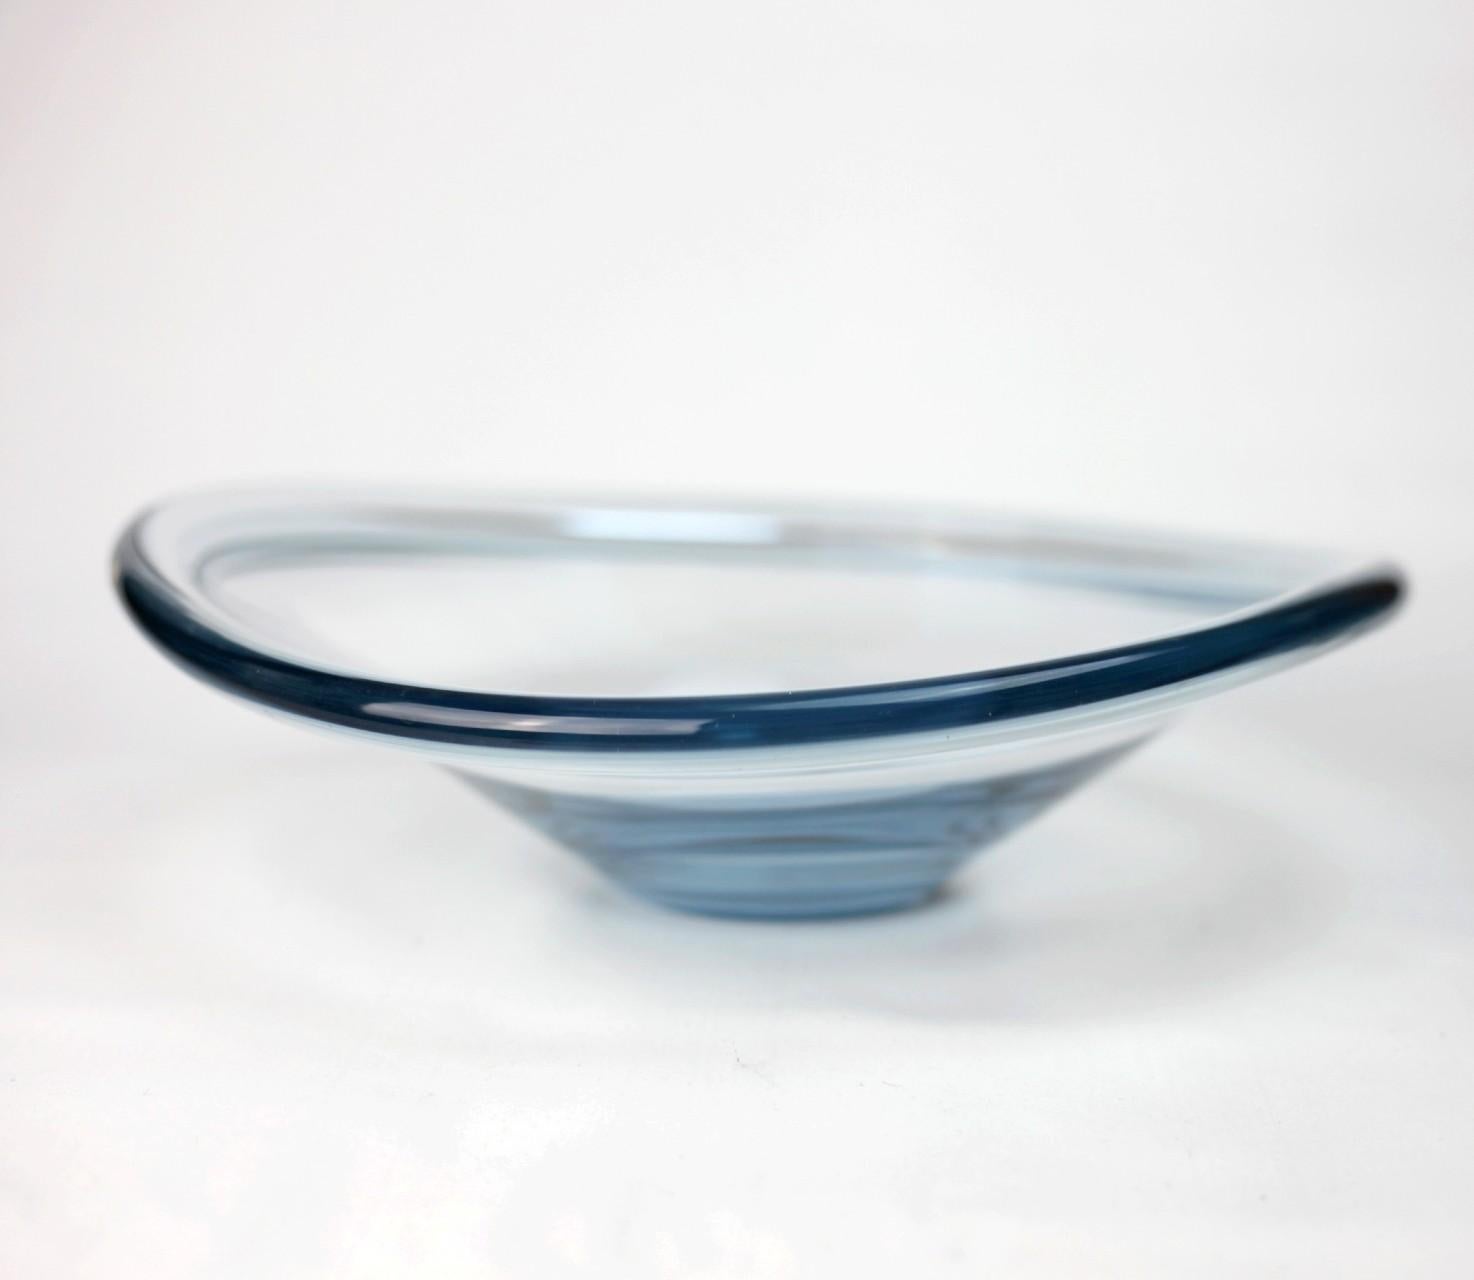 Mid-century aqua blue glass curved bowl by Per Lutken for Holmegaard of Denmark. A flat base and circular form features curved wave-like rounded edges. Handblown in Aqua grey glass with variances in color. Signed and excellent condition 

This